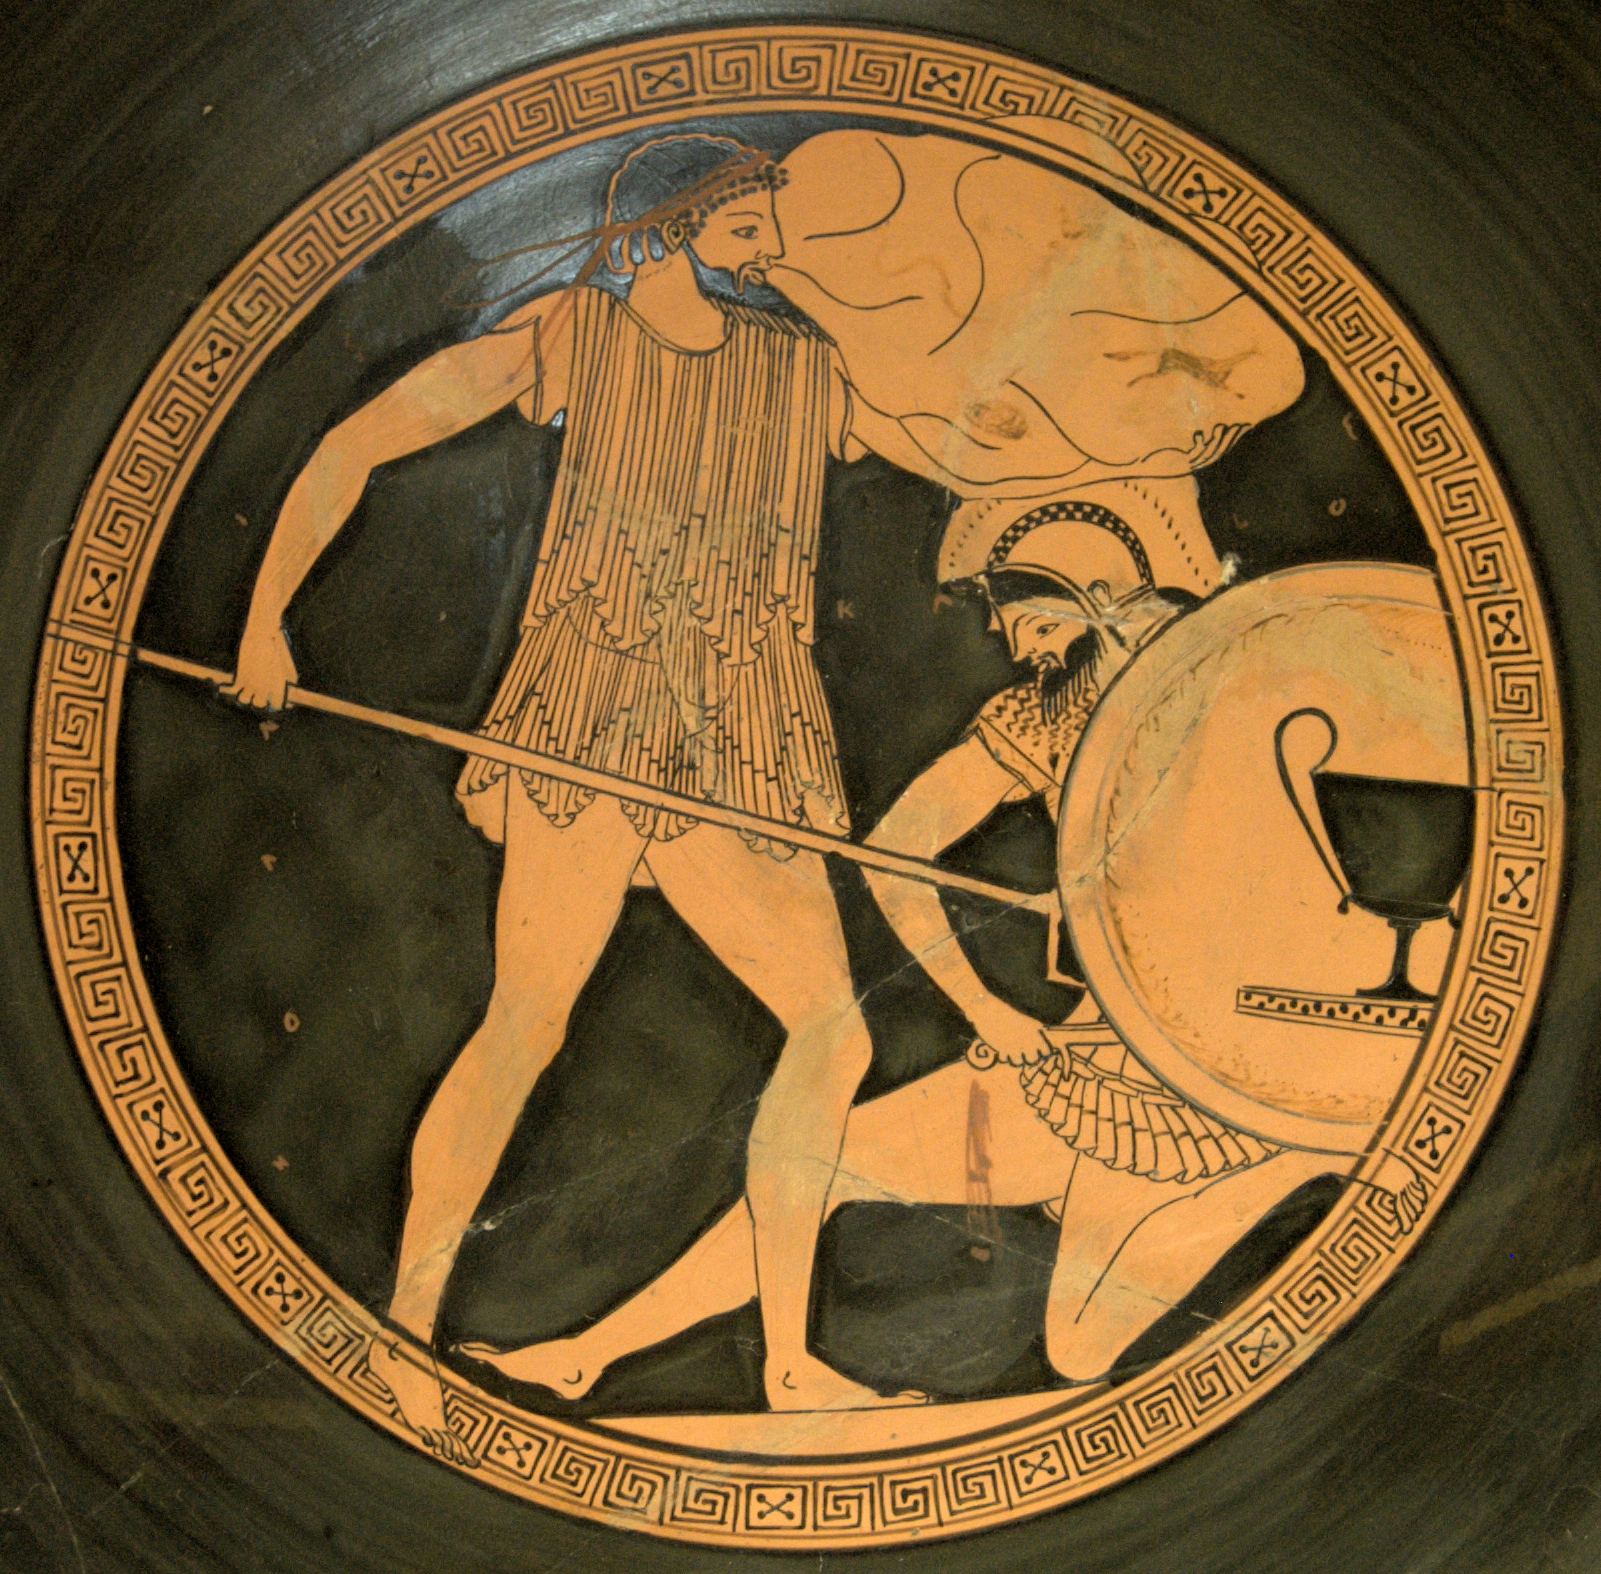 Poseidon, holding a trident, stands over Polybotes.